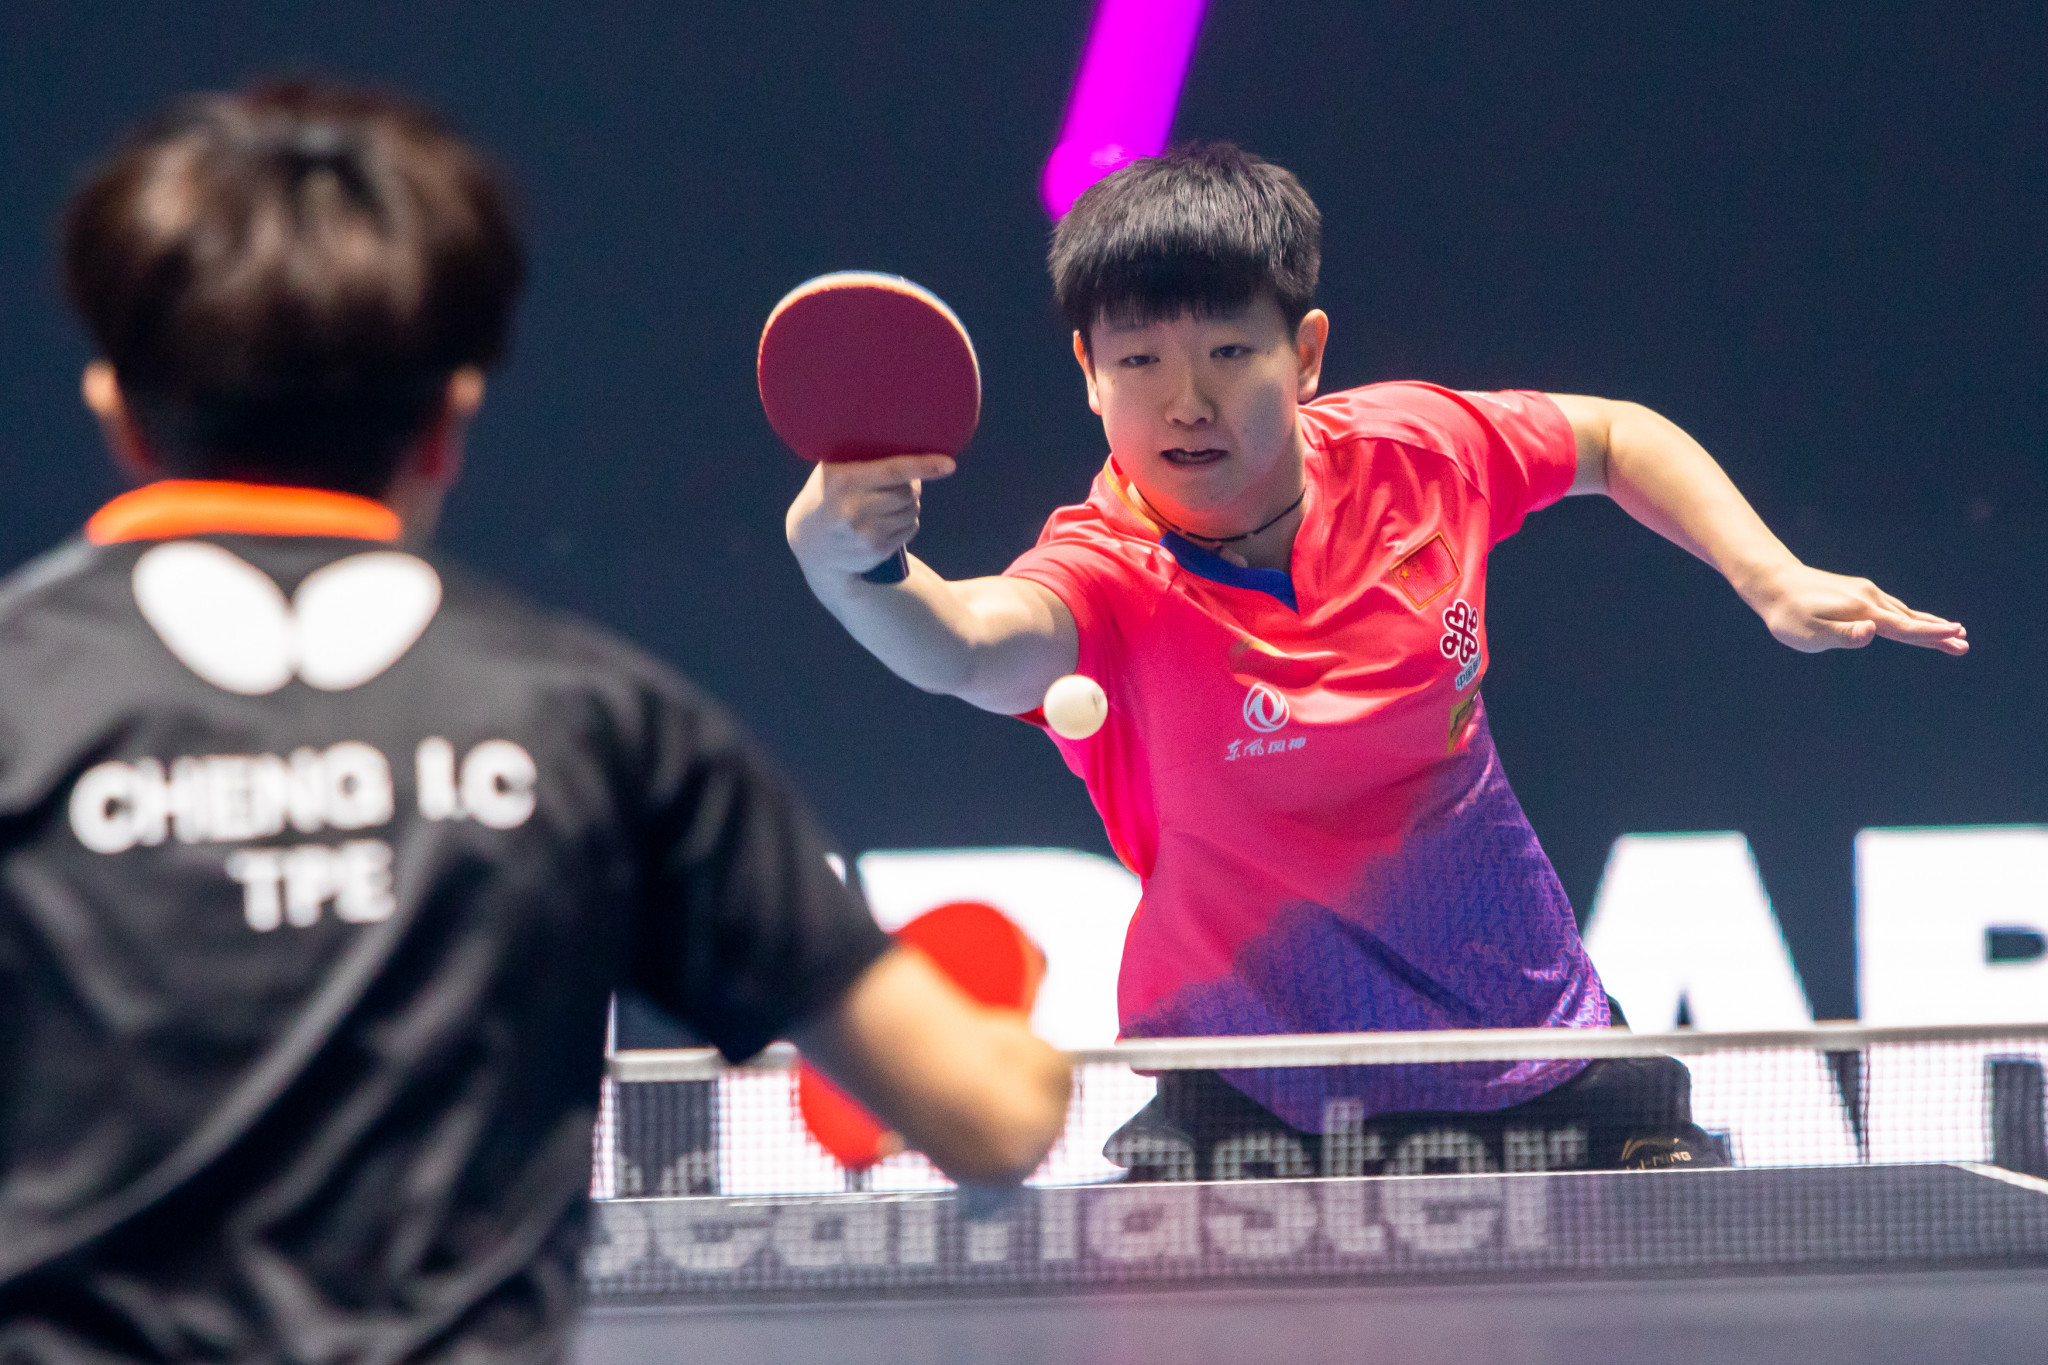 Sun Yingsha delivered one of the best performances on day two ©T2 Diamond